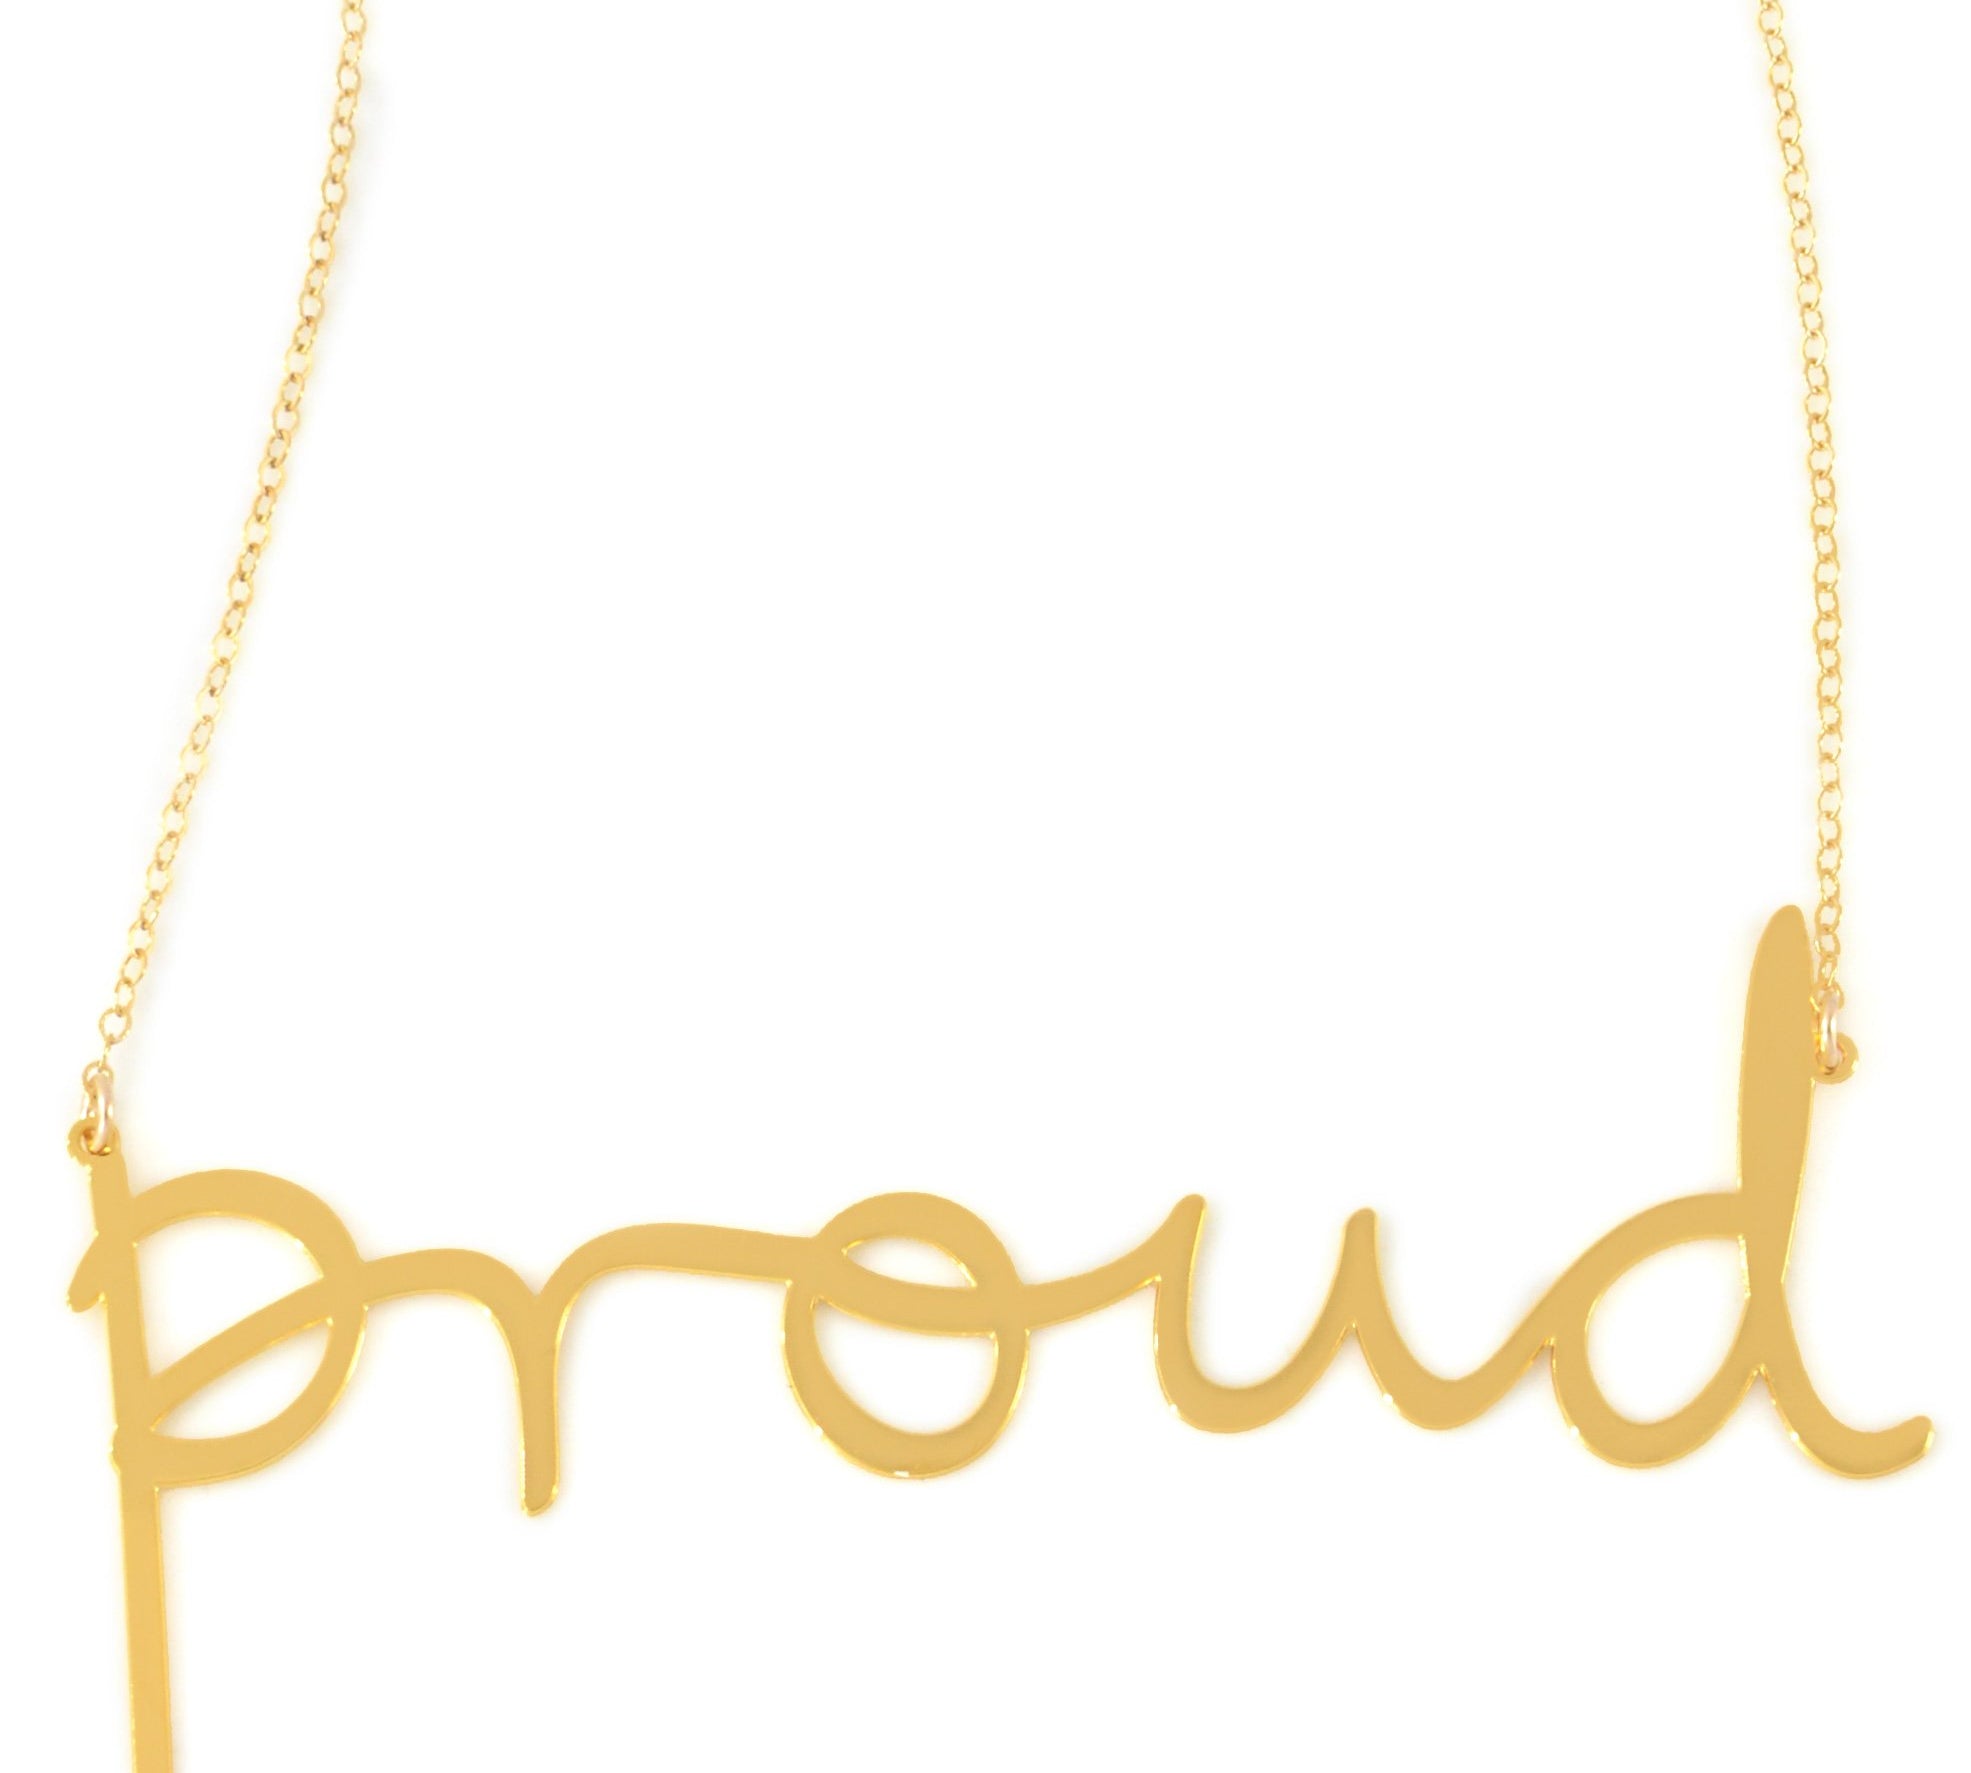 Proud Necklace - High Quality, Affordable, Hand Written, Empowering, Self Love, Mantra Word Necklace - Available in Gold and Silver - Small and Large Sizes - Made in USA - Brevity Jewelry